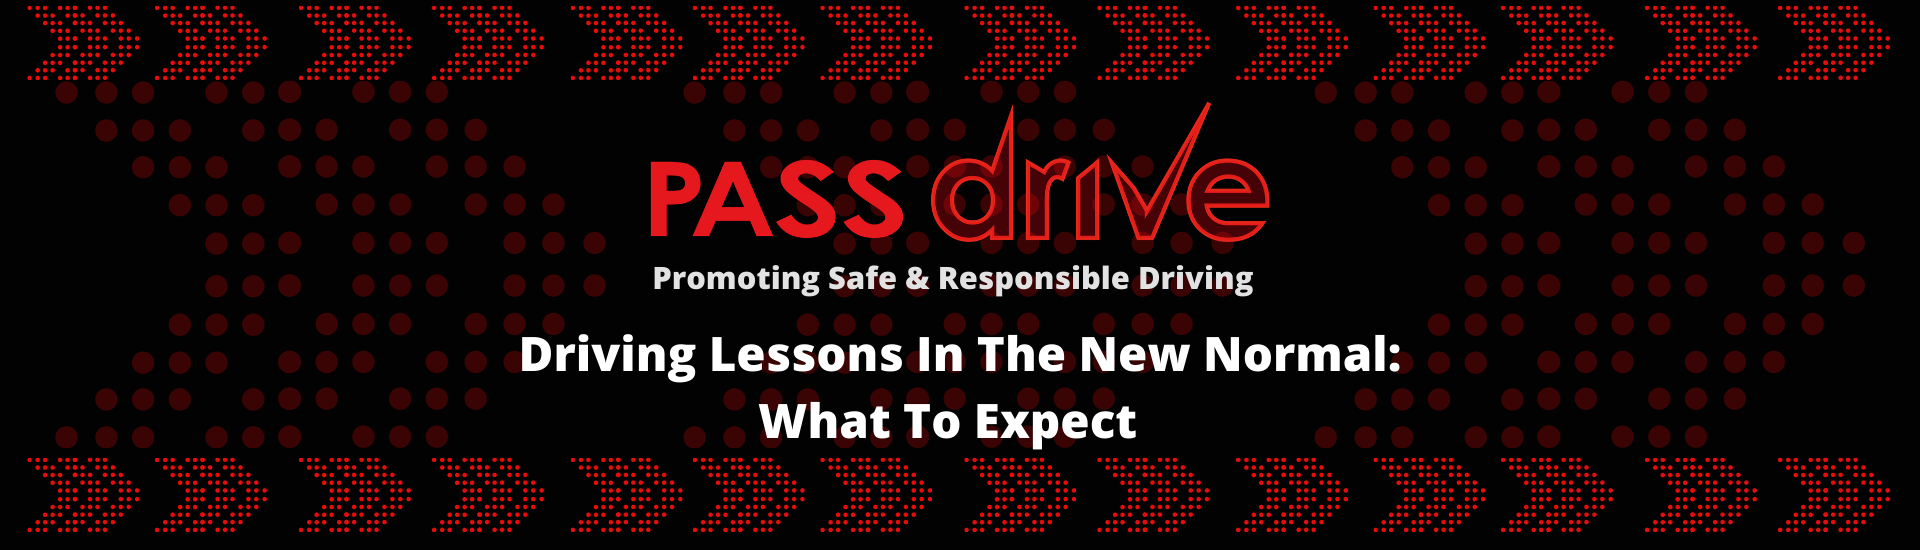 Driving Lessons COVID-19 - What To Expect - Pass Drive Driving School - Pass Drive Blog